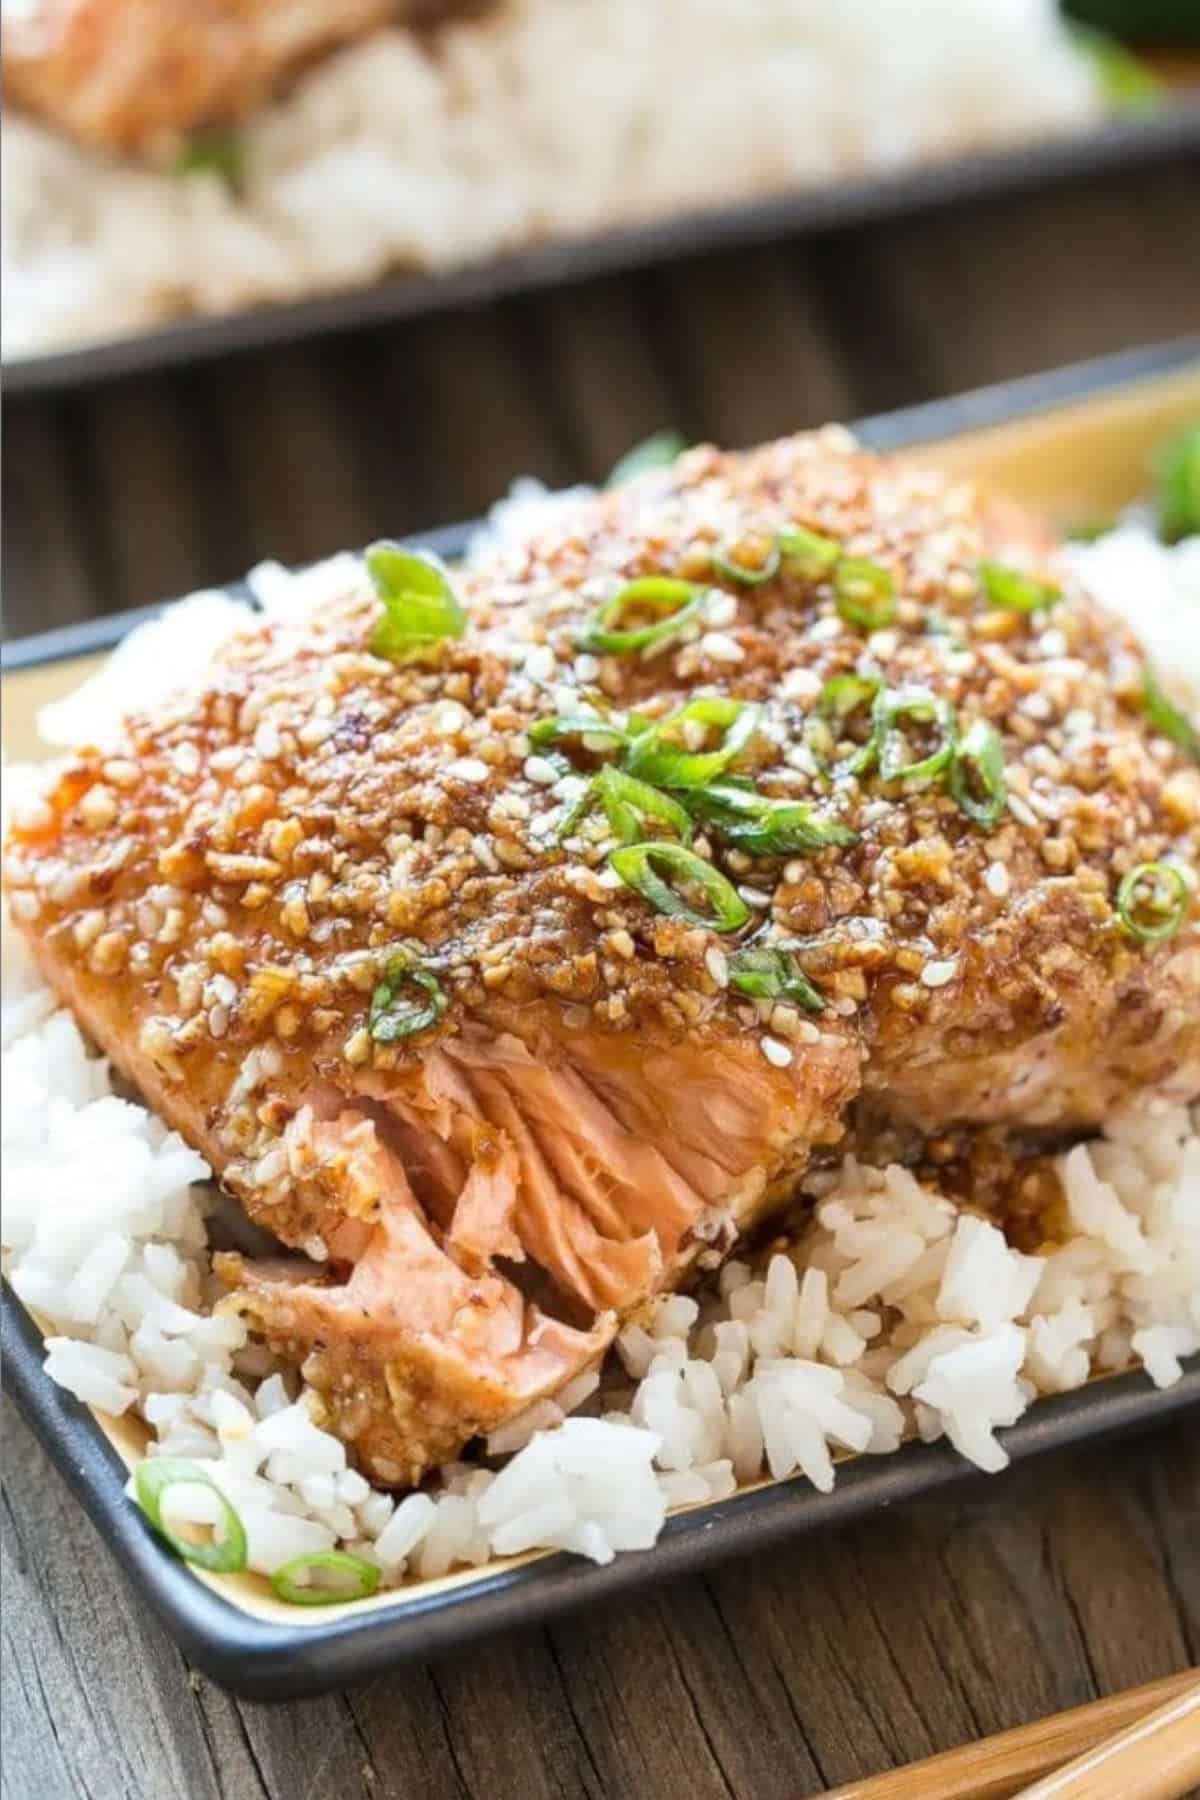 Almond crusted salmon on a bed of rice on a plate.